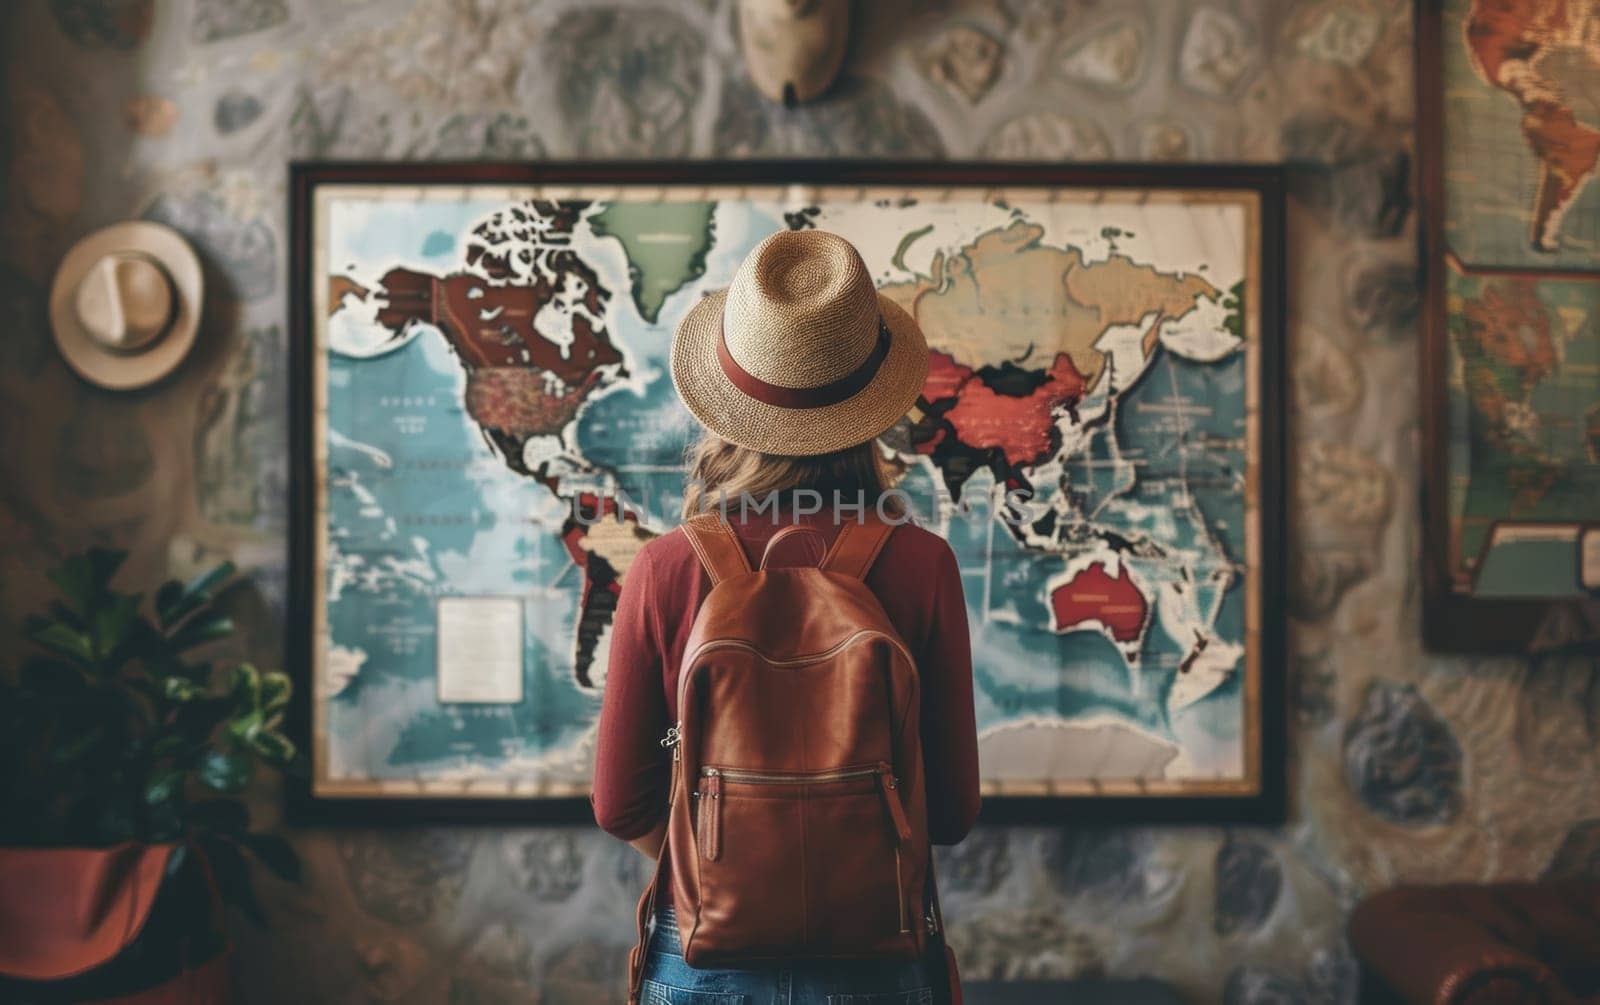 A traveler in a straw hat is engrossed in studying a colorful wall map, contemplating her next destination. The map invites a sense of wonder and exploration